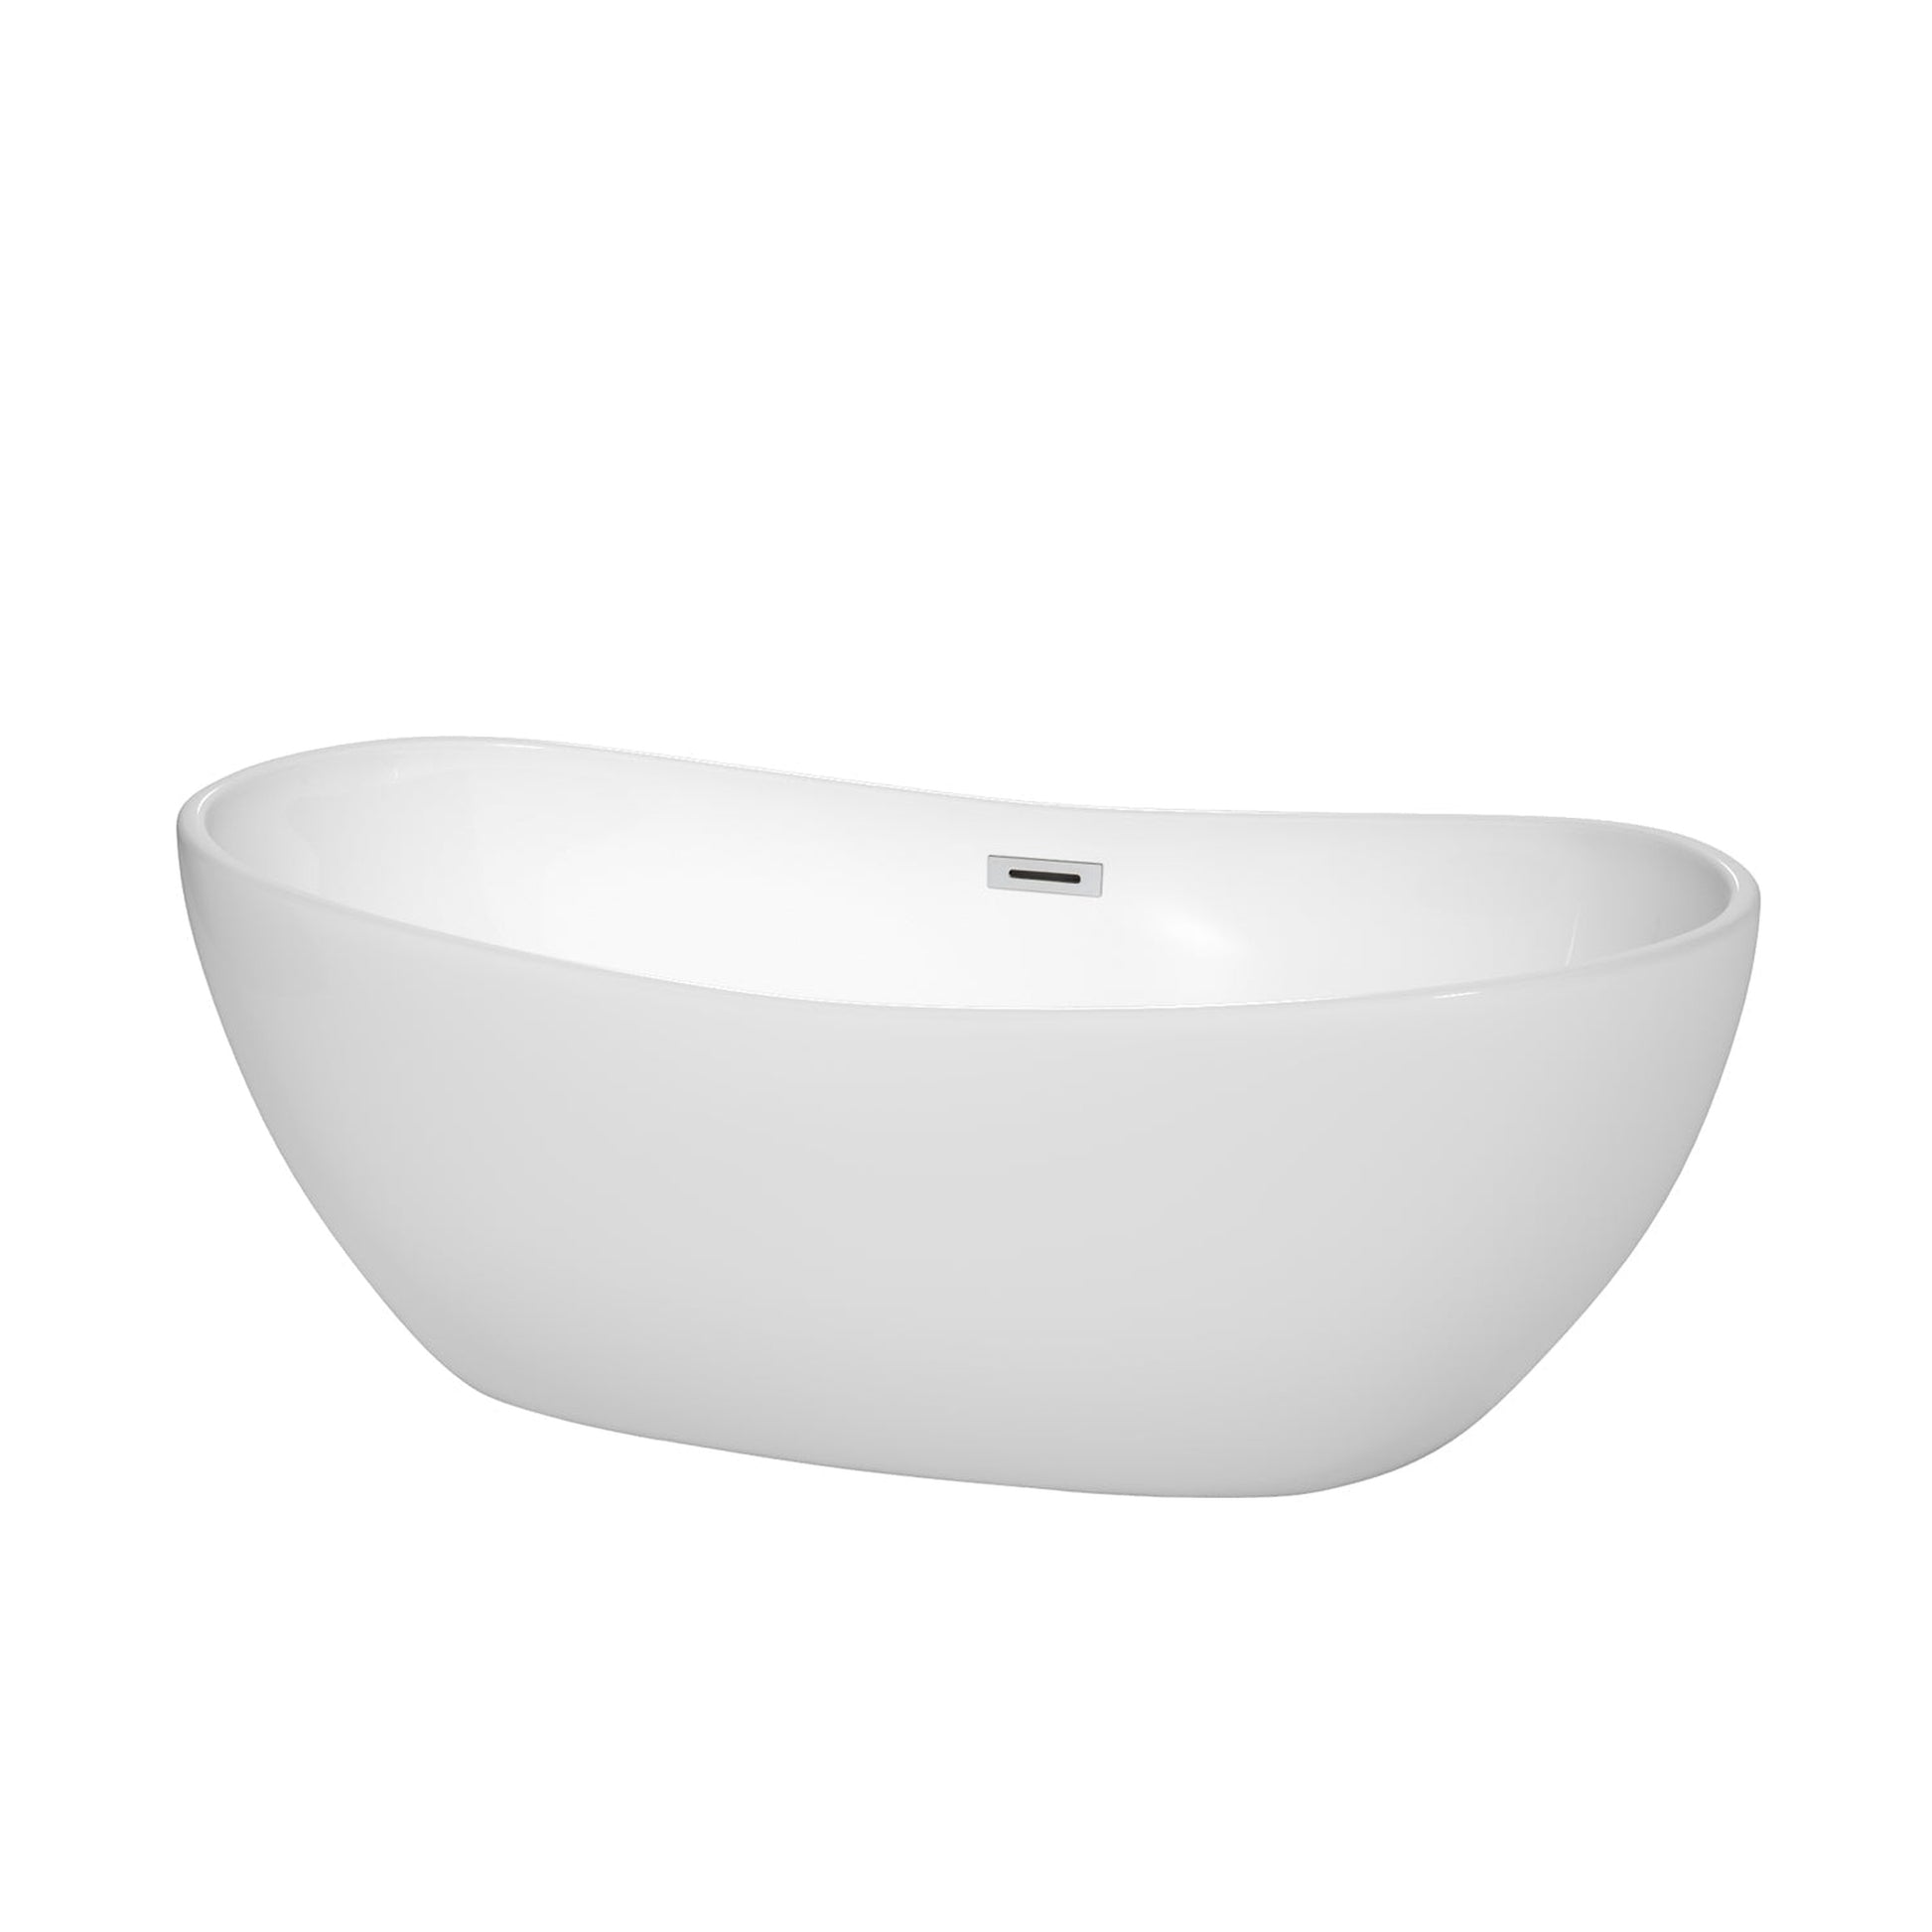 Wyndham Collection Rebecca 65" Freestanding Bathtub in White With Polished Chrome Drain and Overflow Trim